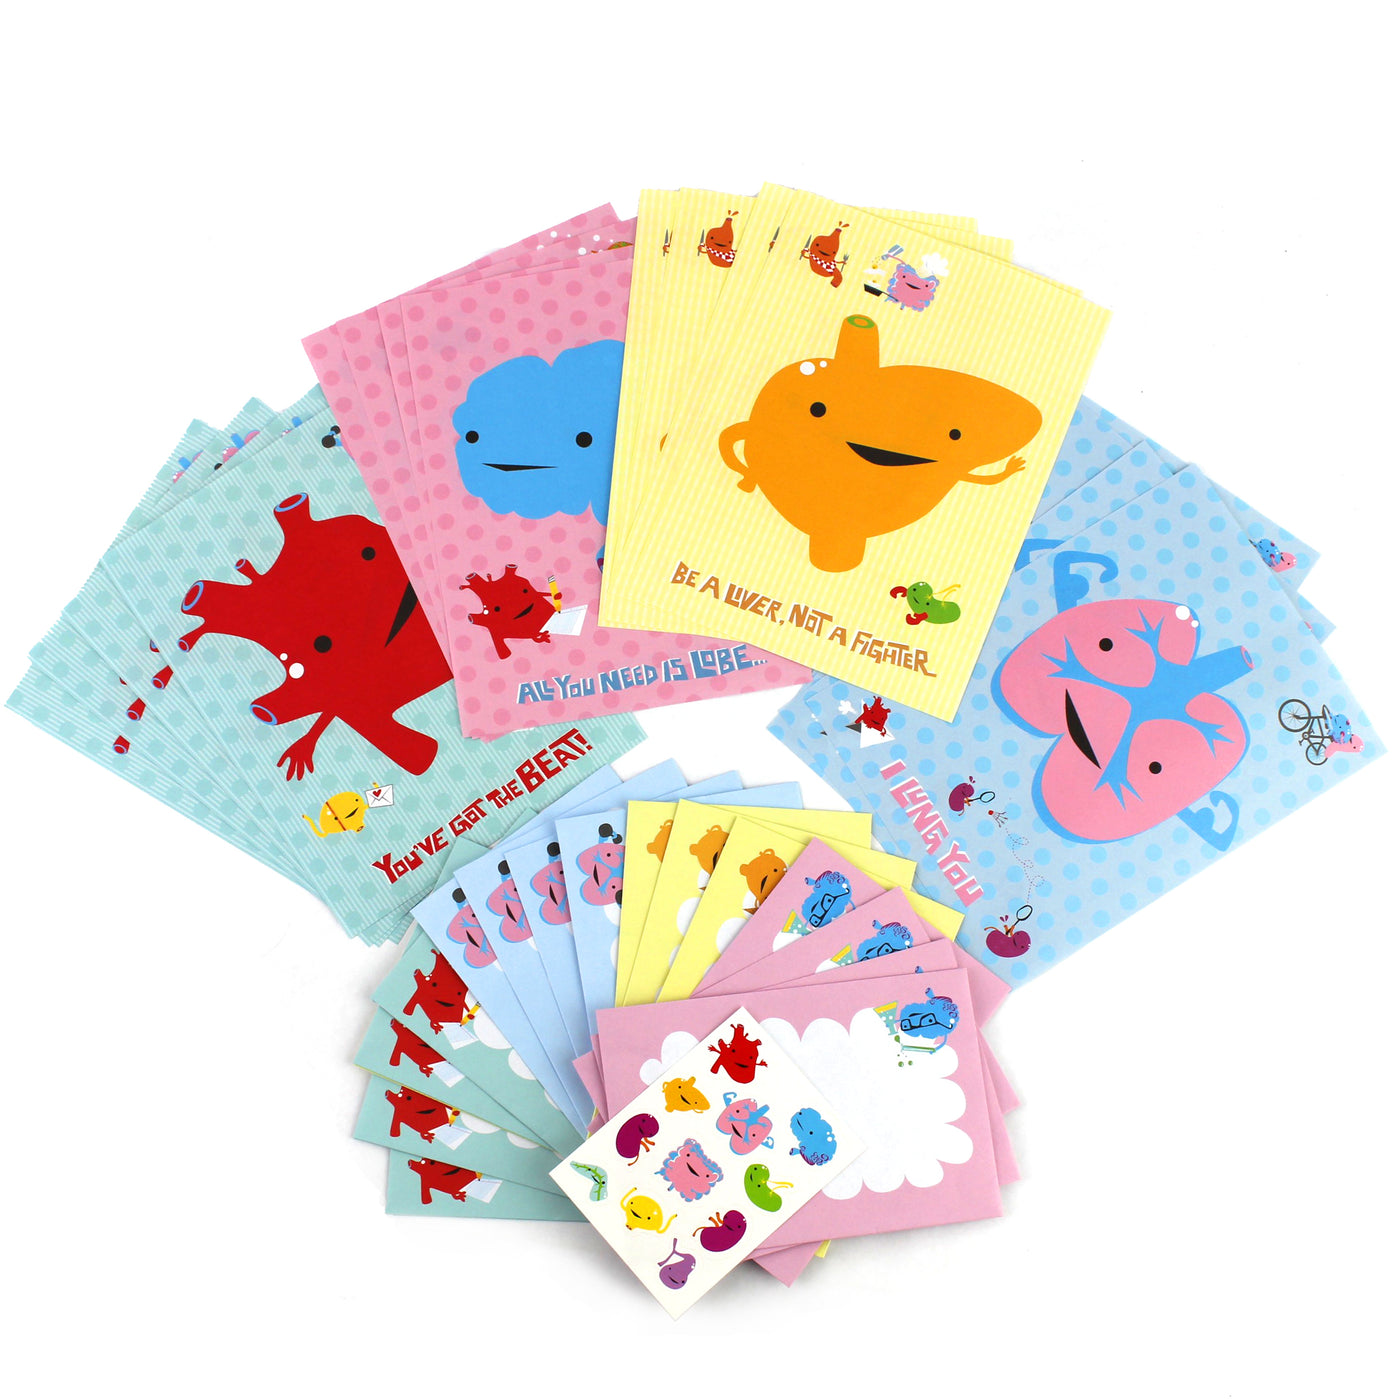 Cute Organs Stationery - Heart Brain Lung & Liver Stationery w/ Stickers